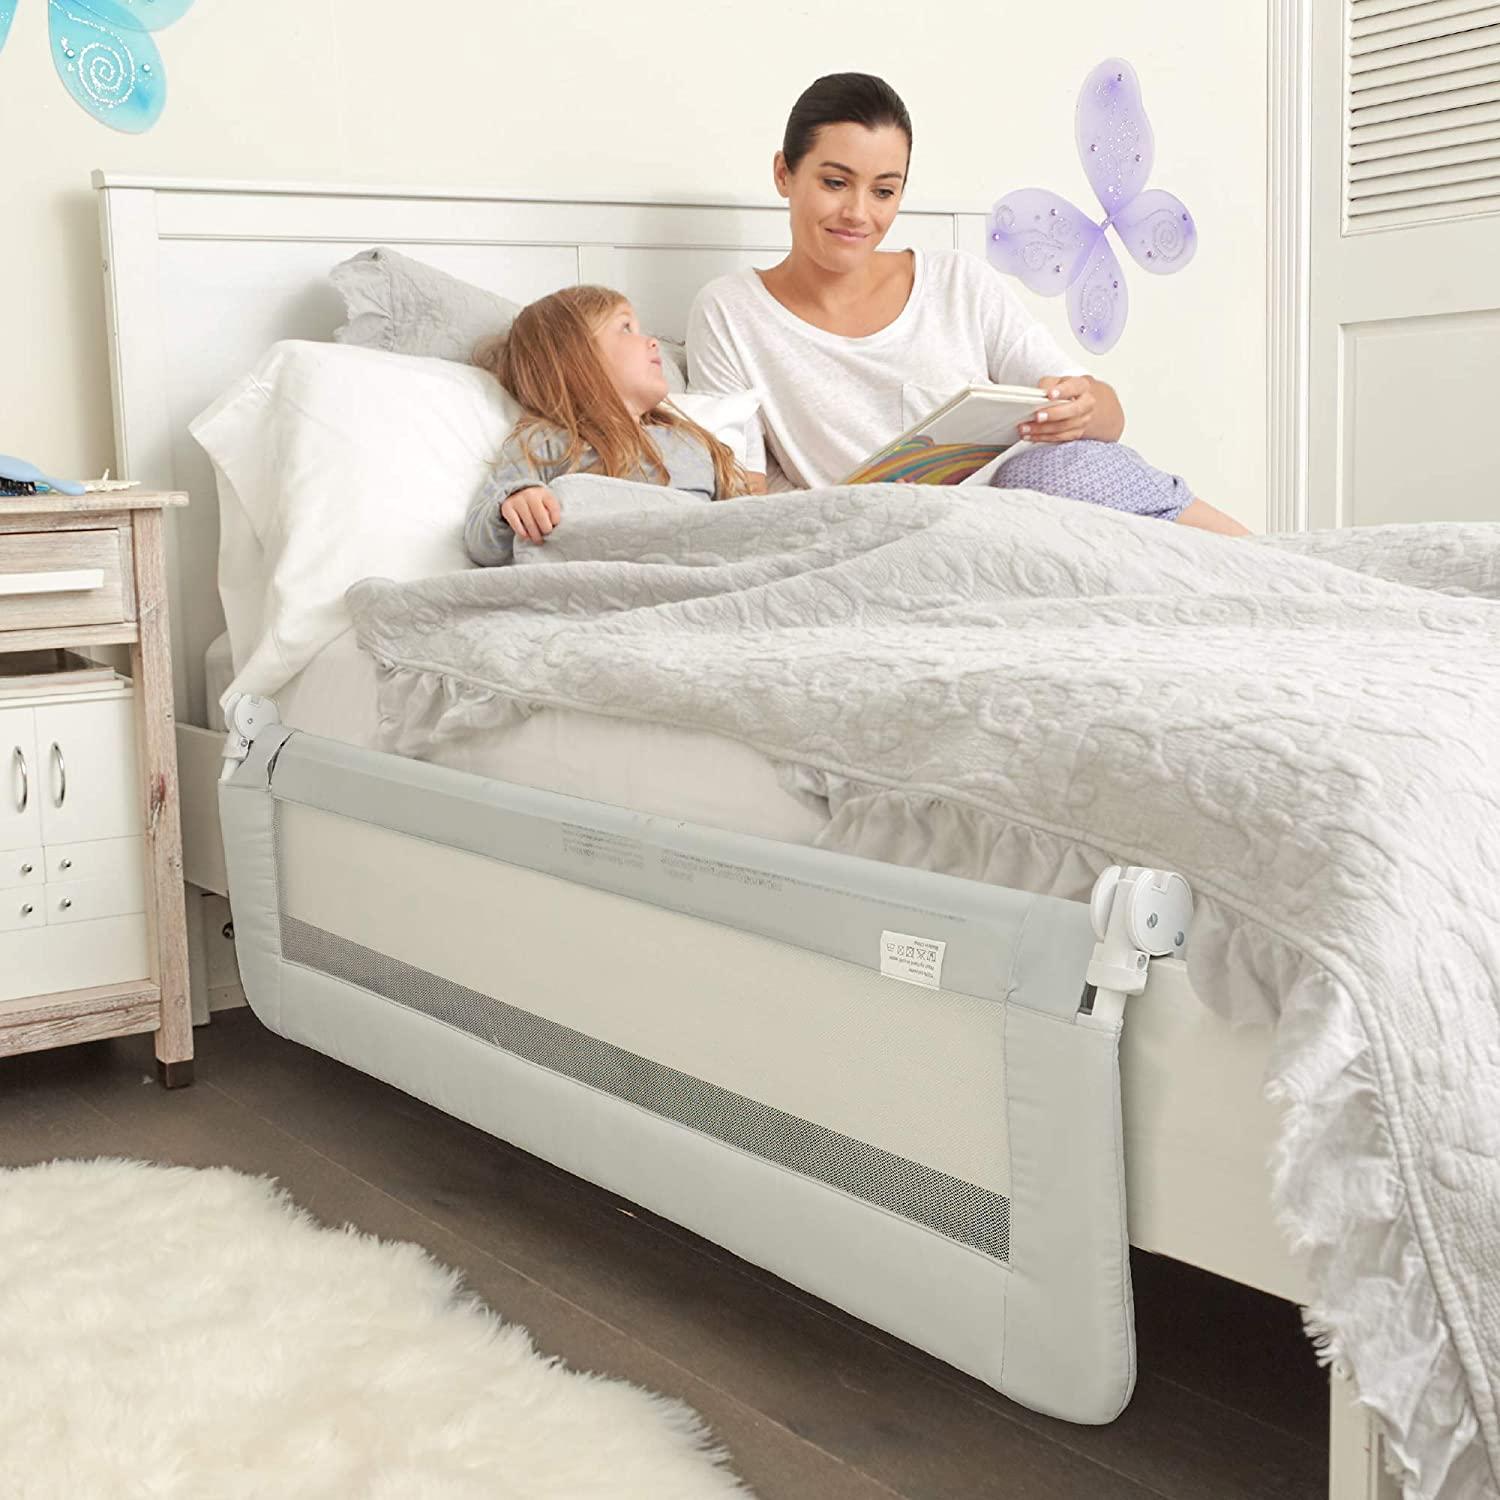 Bed Rail for Toddlers - Extra Long Toddler Bedrail Guard for Kids